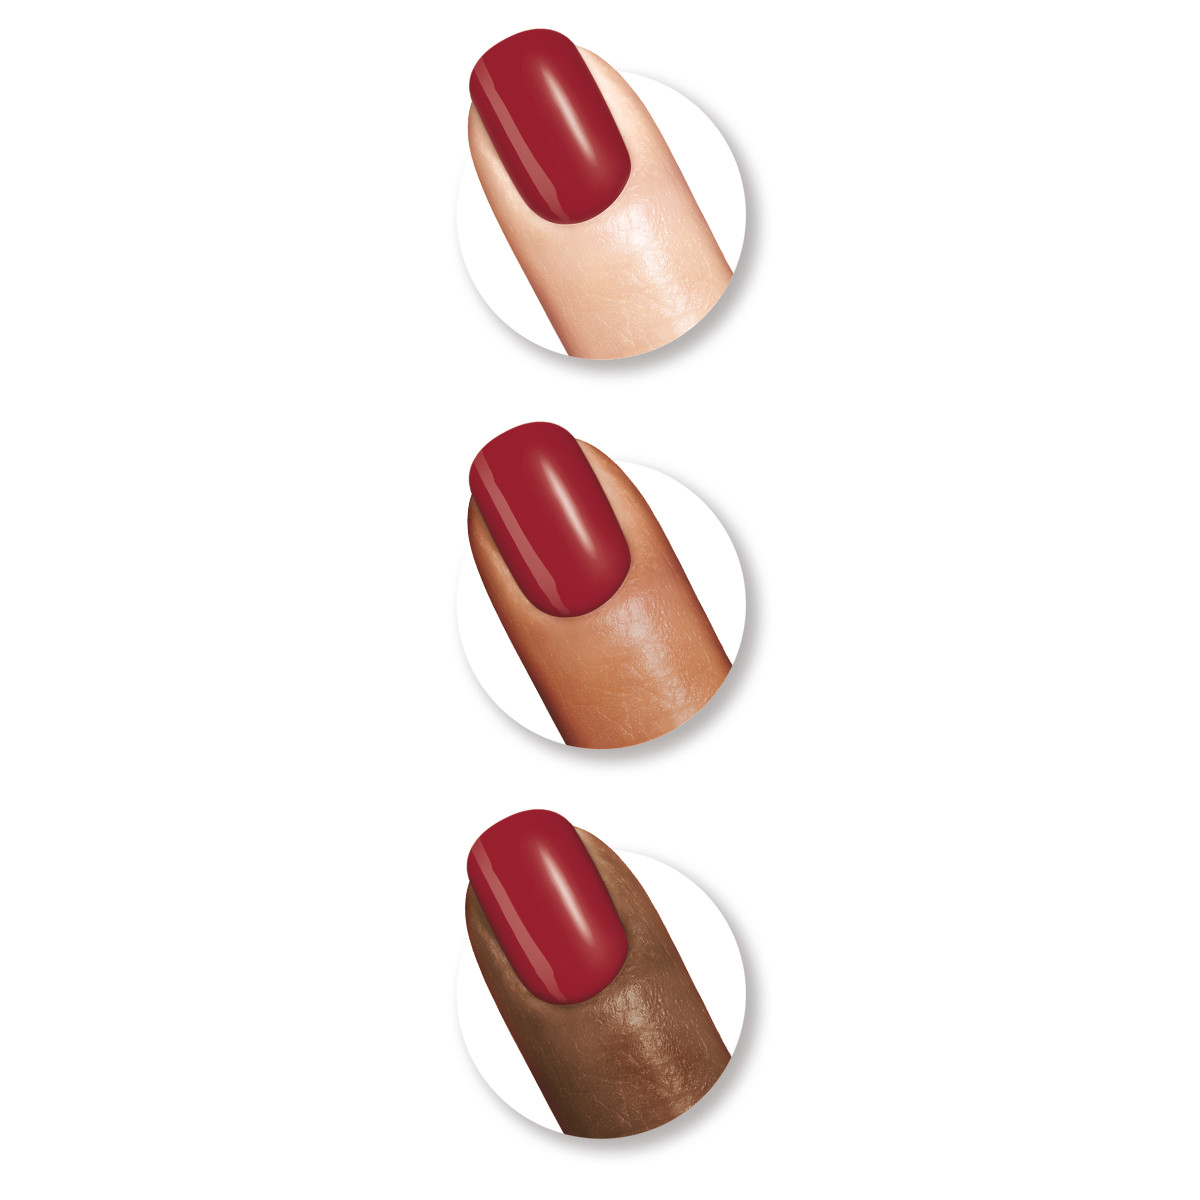 Sally Hansen Complete Salon Manicure Nail Color, Red It Online - image 2 of 2